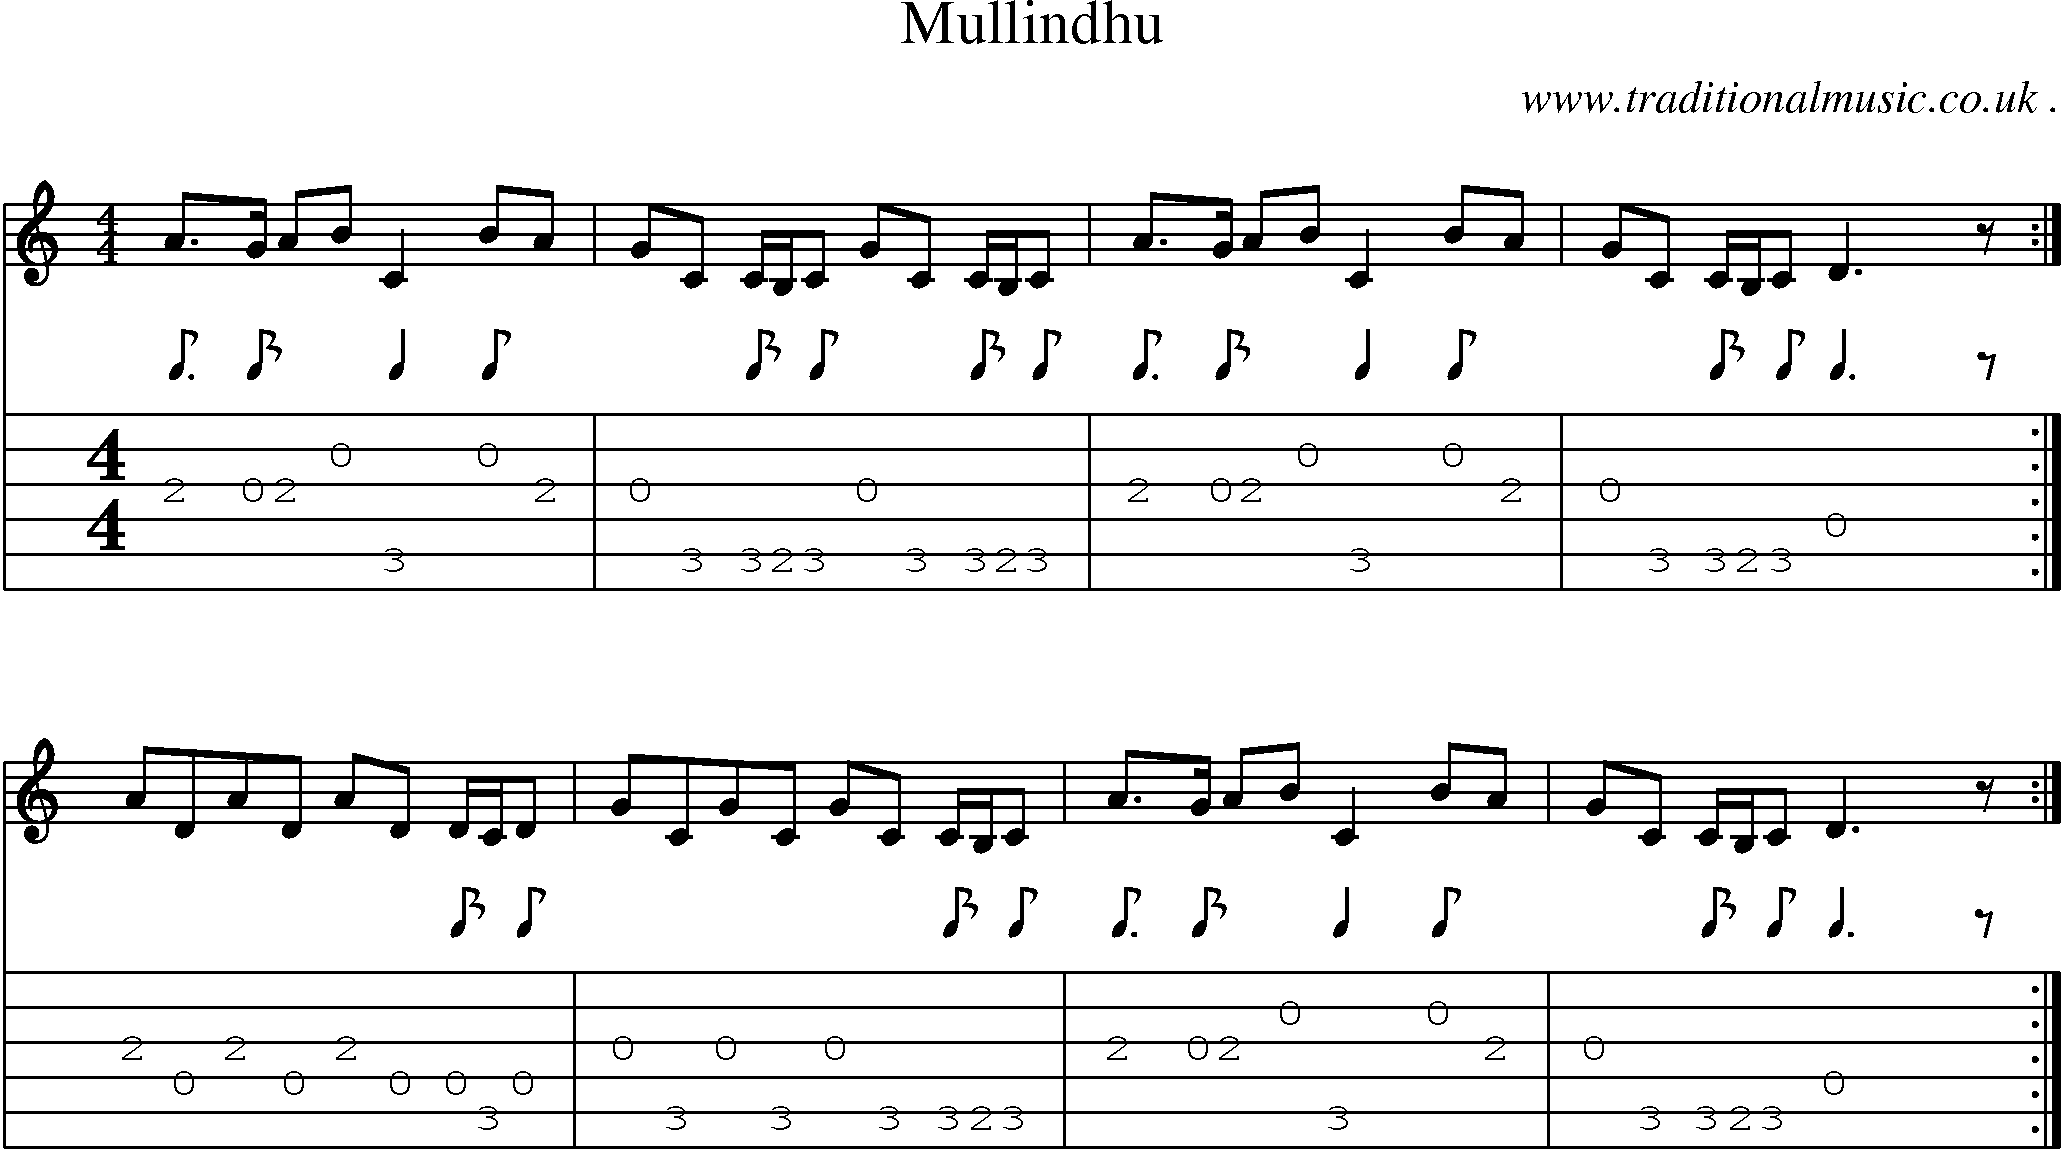 Sheet-music  score, Chords and Guitar Tabs for Mullindhu